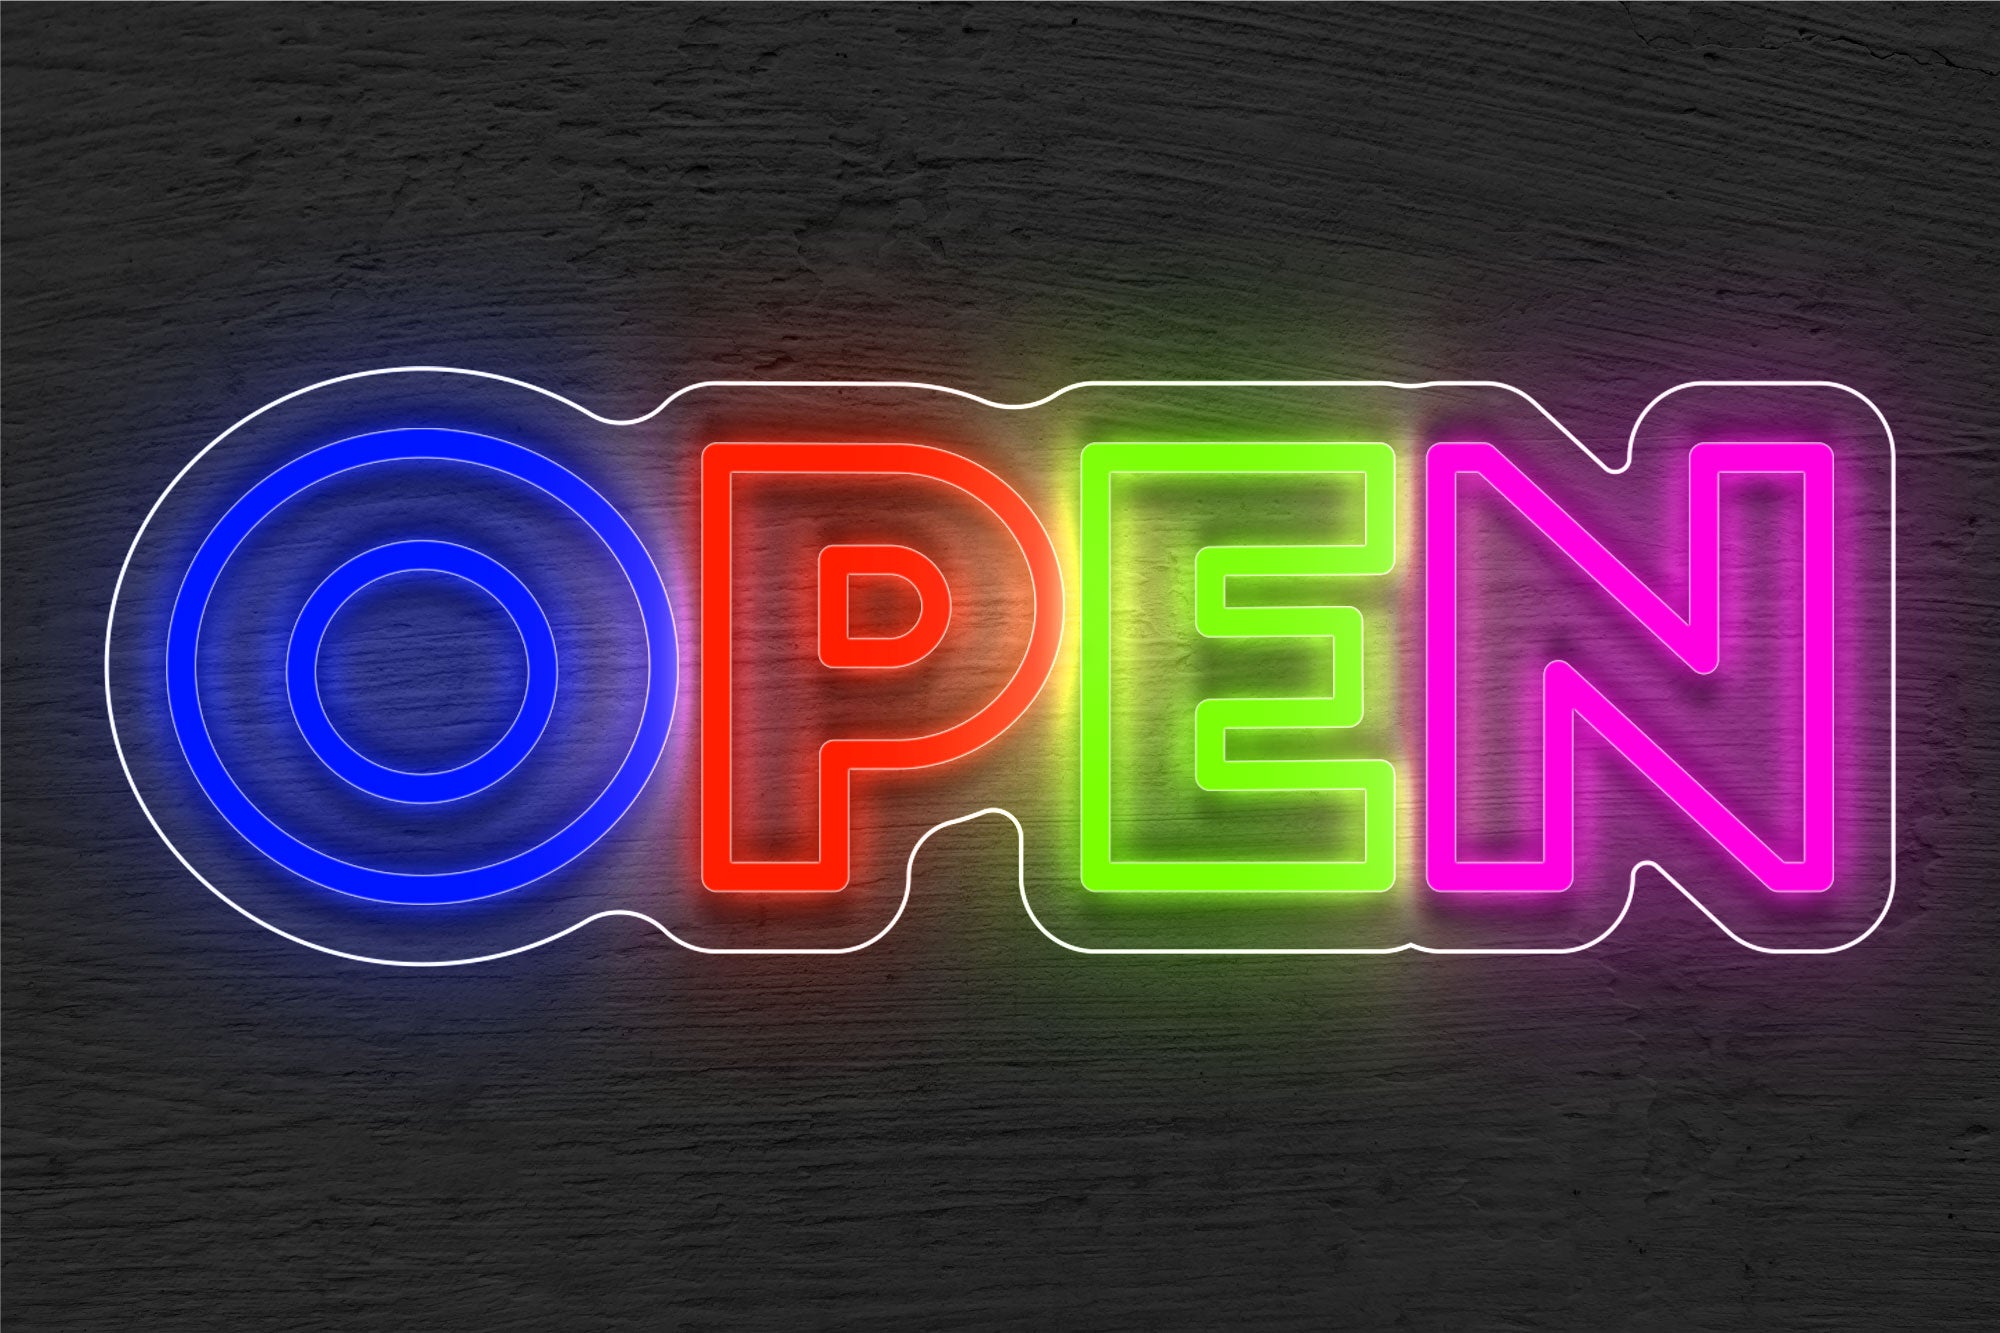 Multi-color and Double Stroke "OPEN" LED Neon Sign